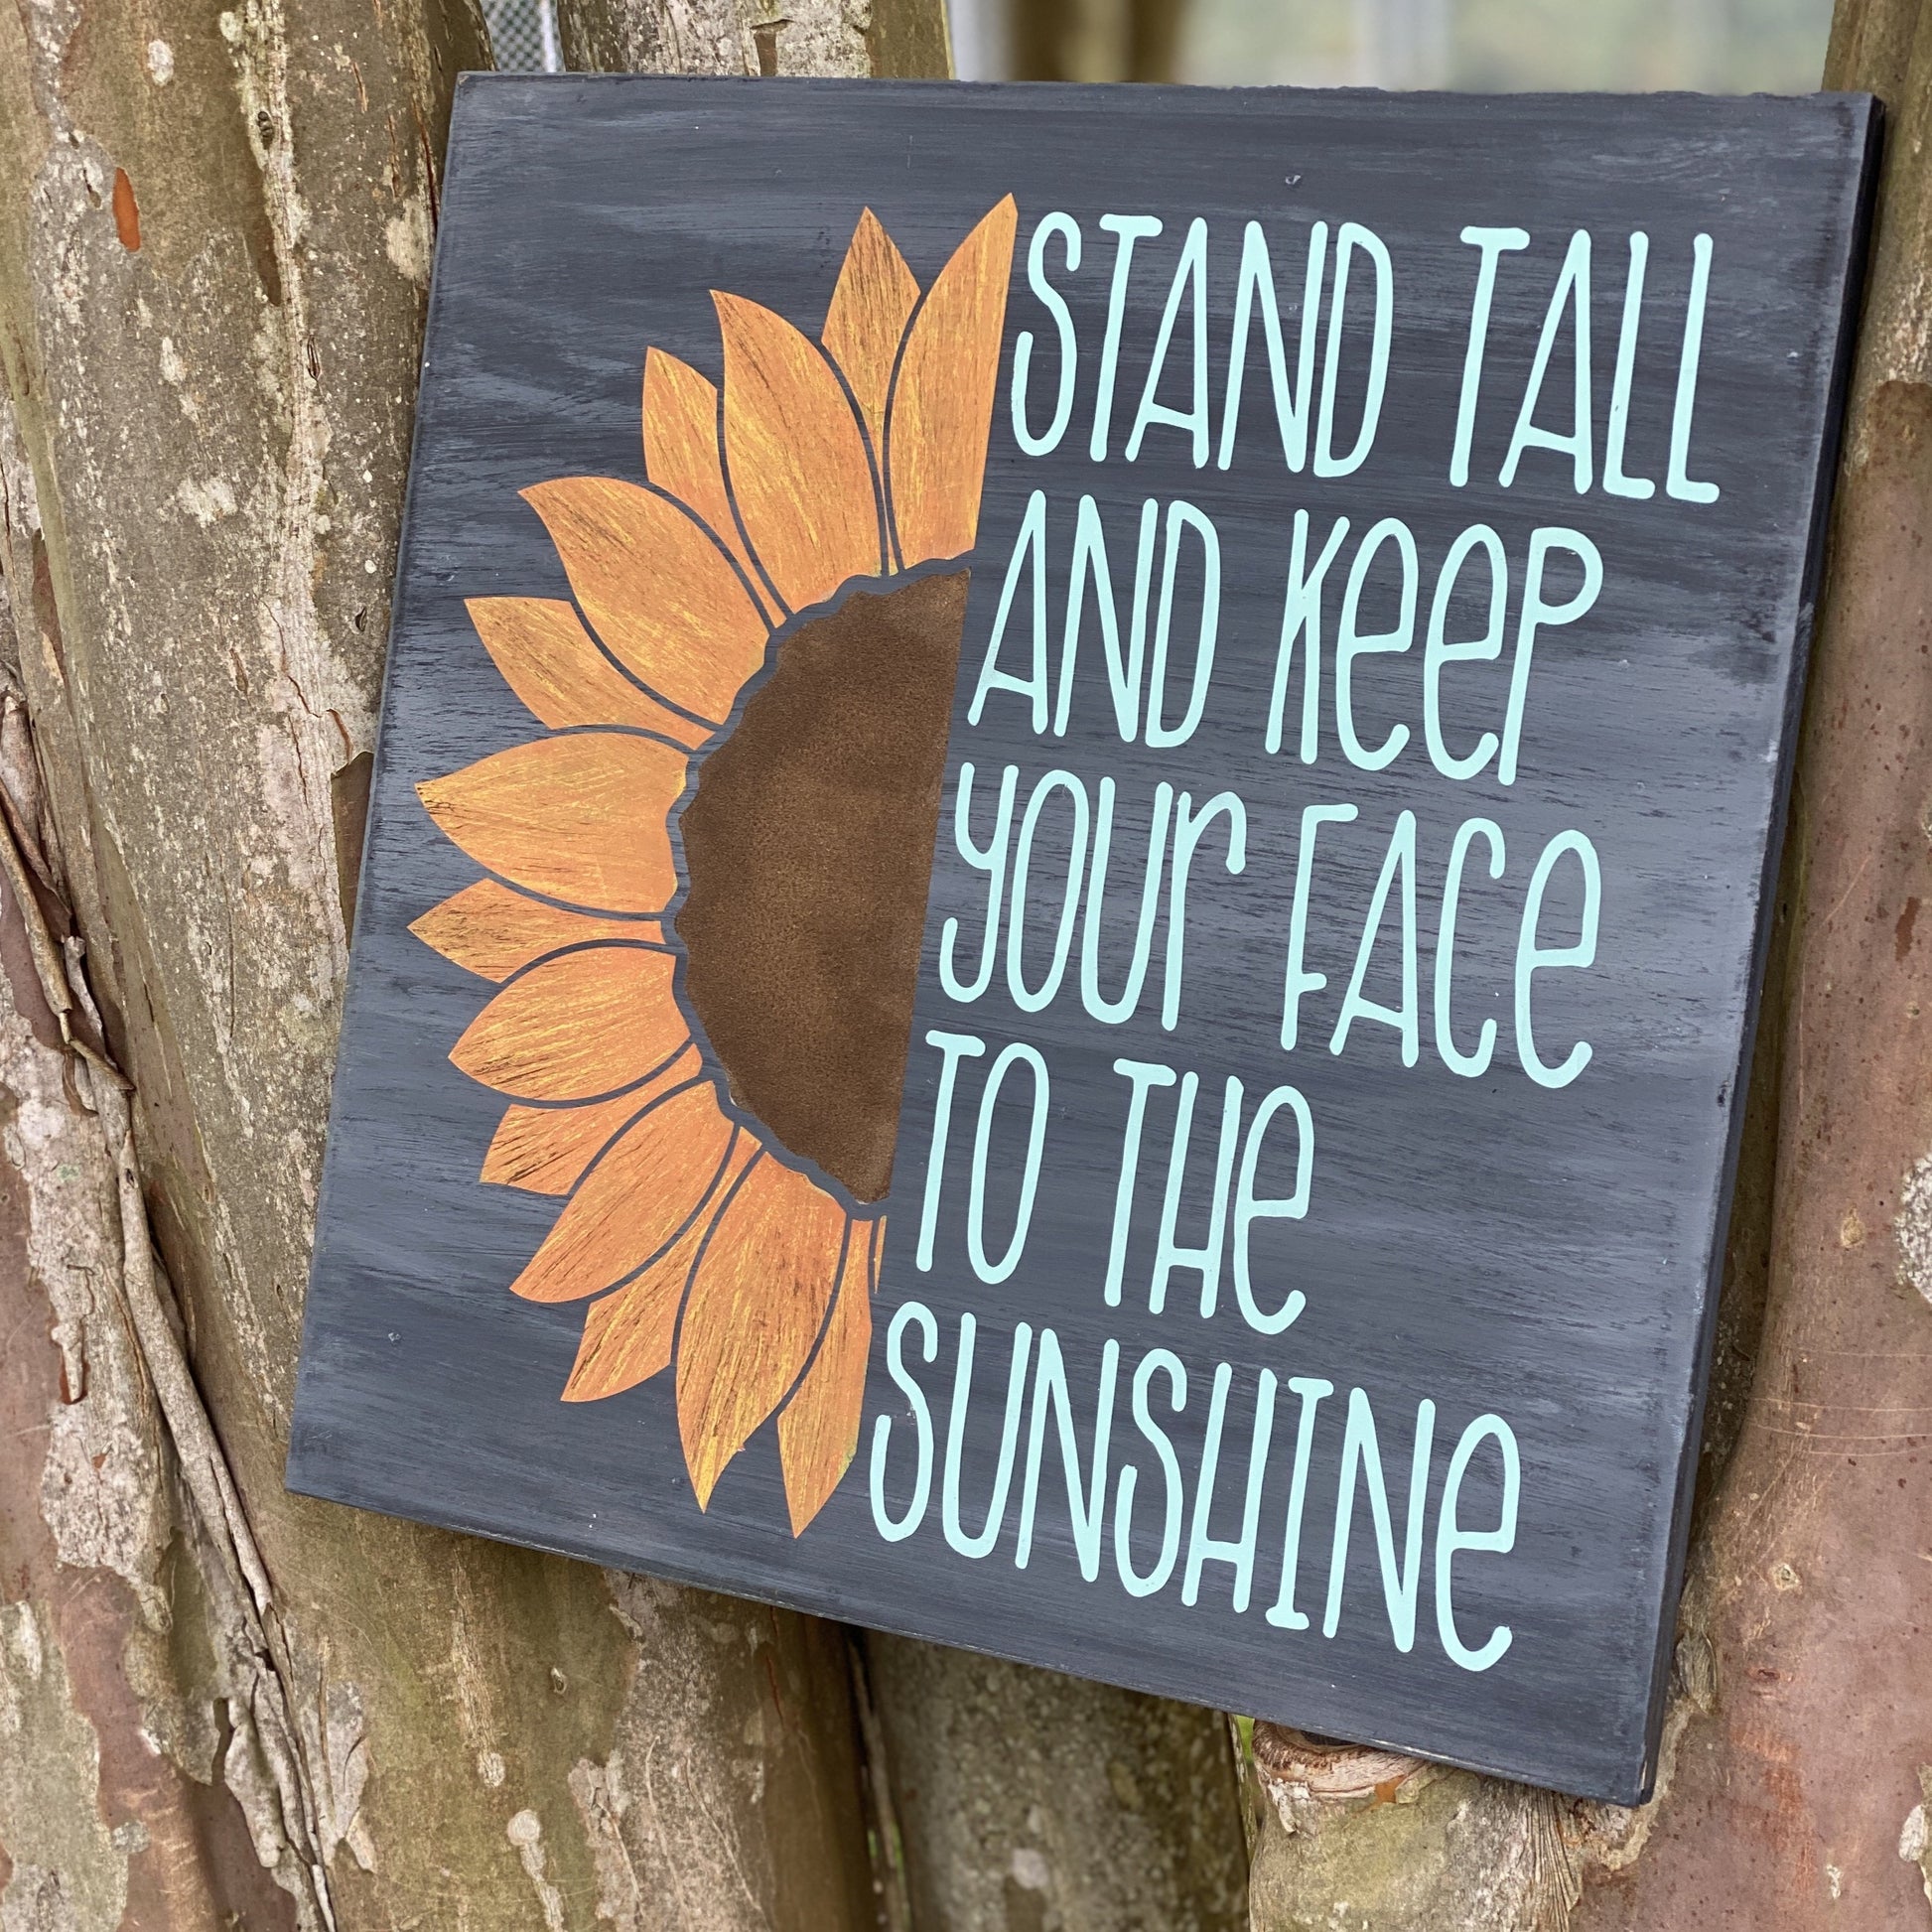 Stand Tall and Keep your Face to the Sunshine : SQUARE DESIGN - Paisley Grace Makery